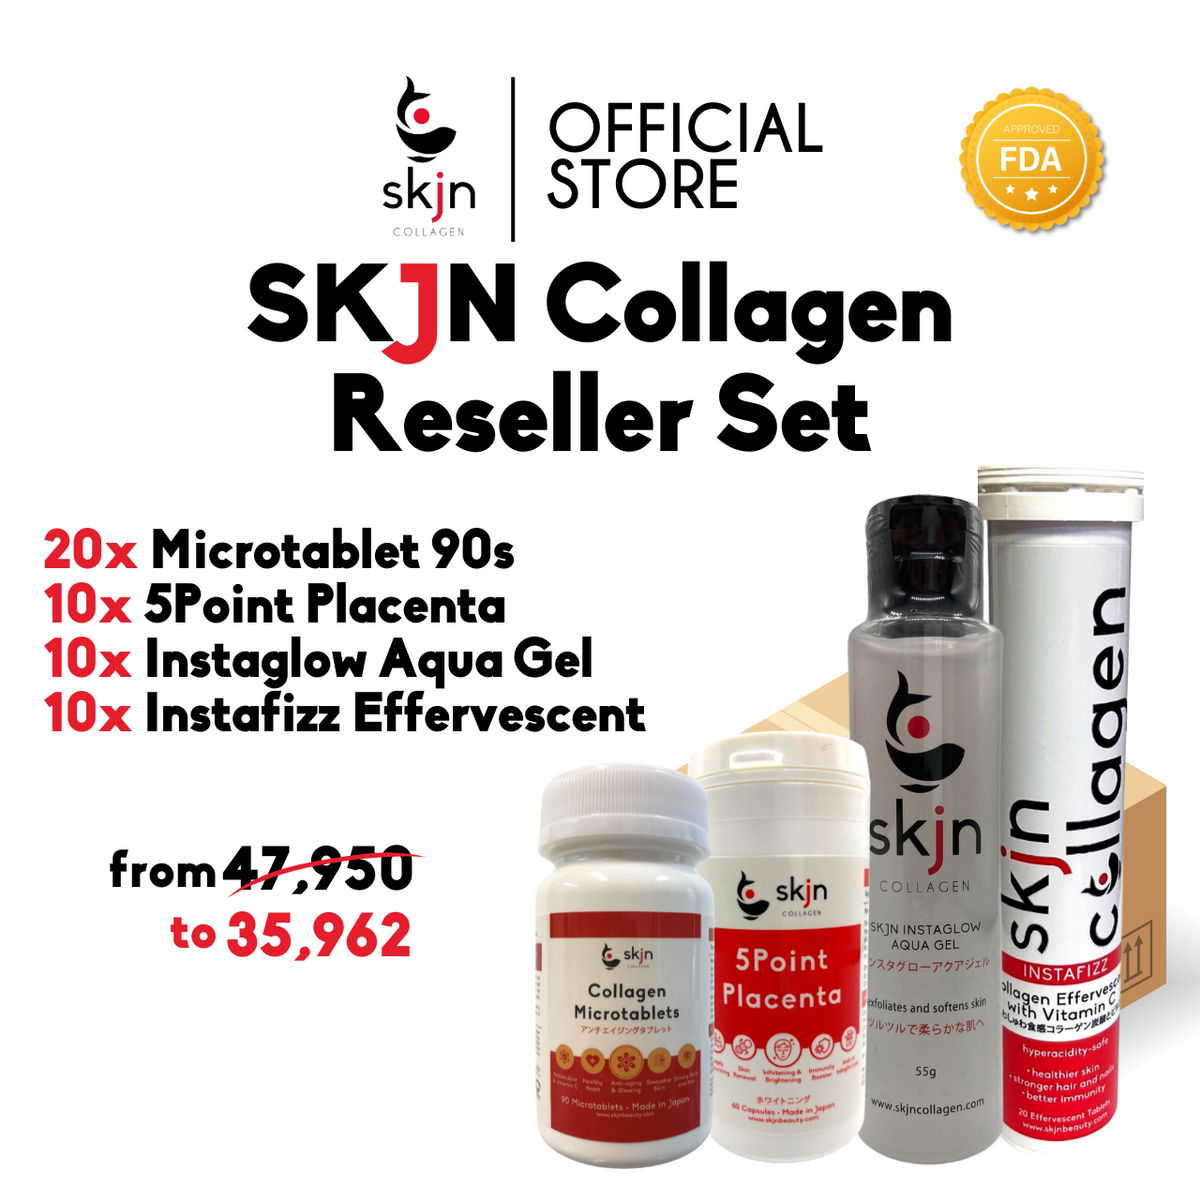 Reseller Set A: Get 25% off on 20 Microtablet 90s, 10 5Point Placenta, 10 AquaGel and 10 Instafizz